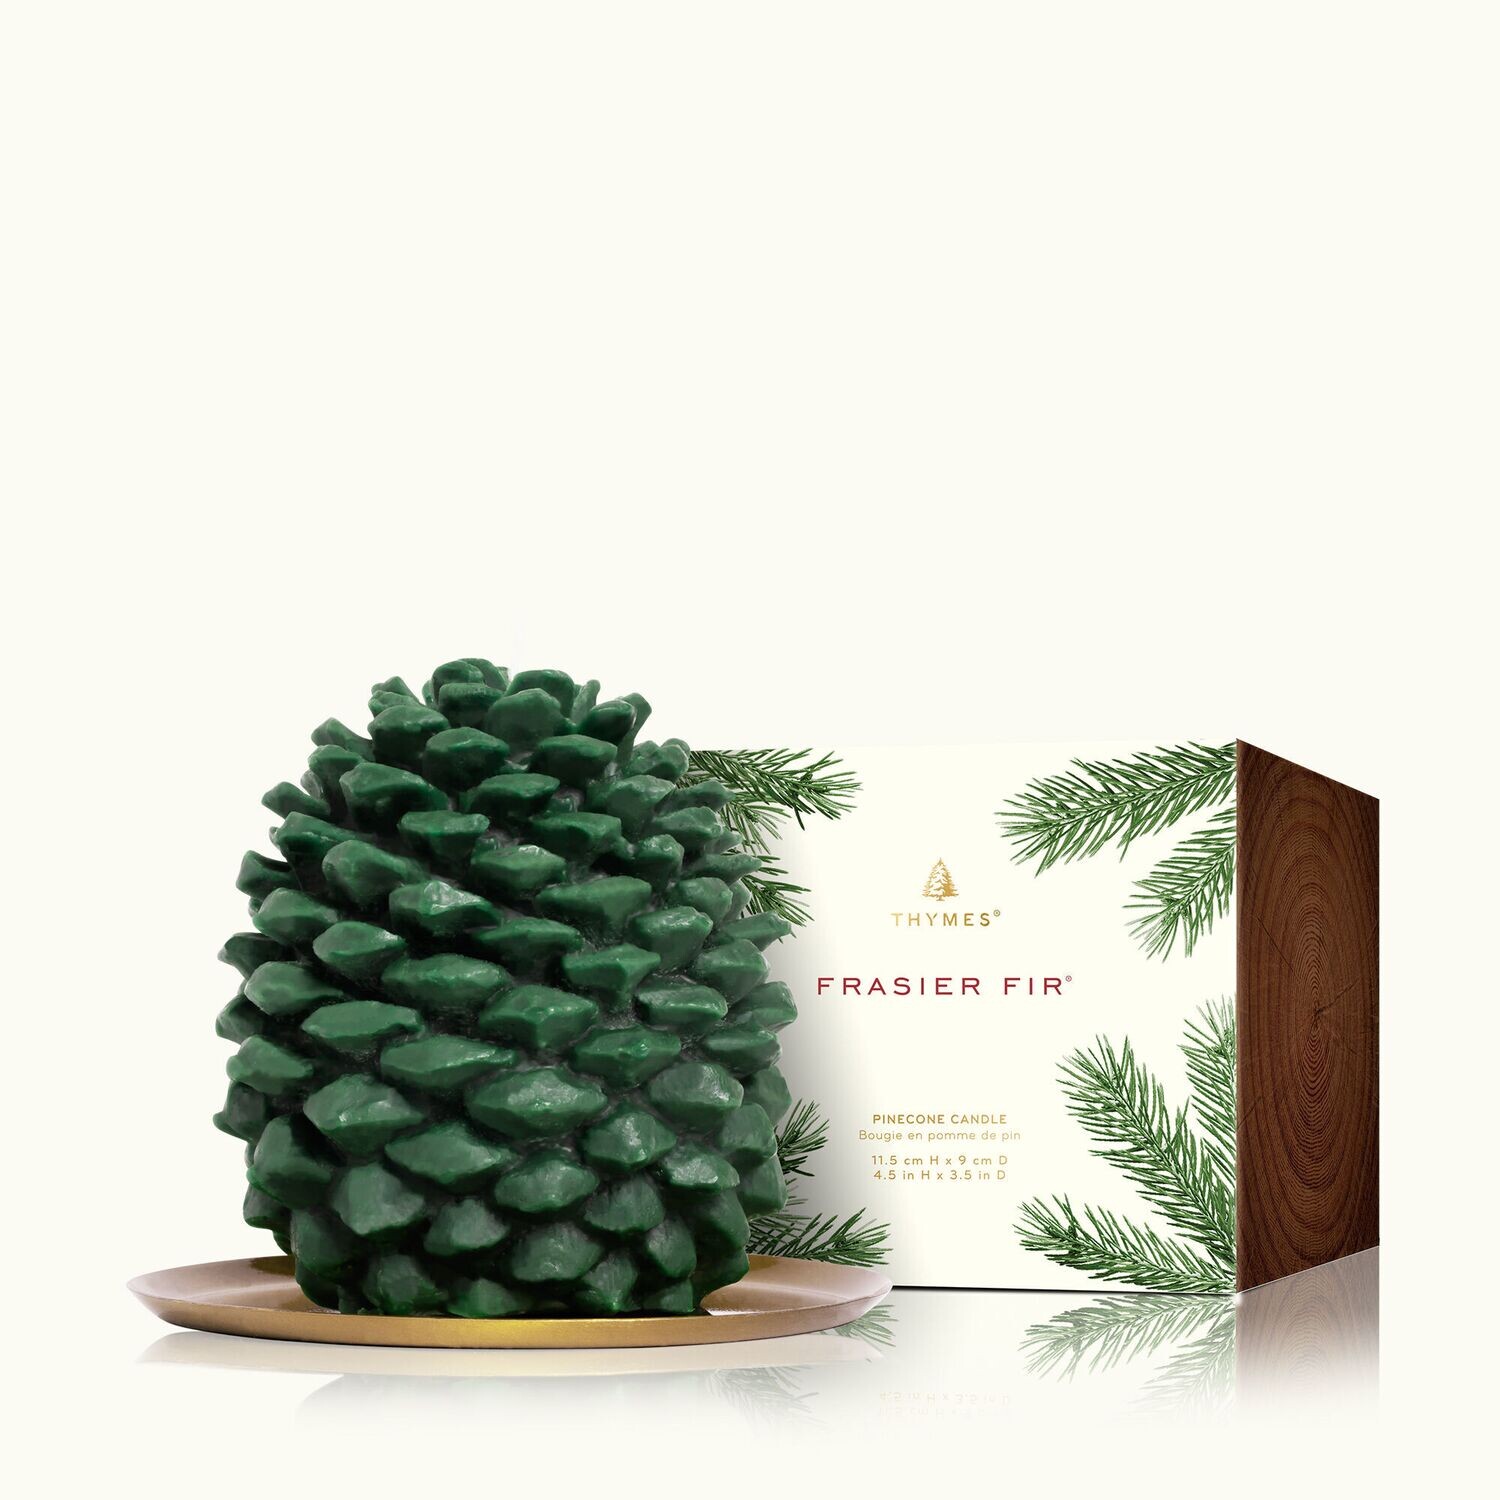 FINAL SALE Frasier Fir Petite Molded Pinecone Candle